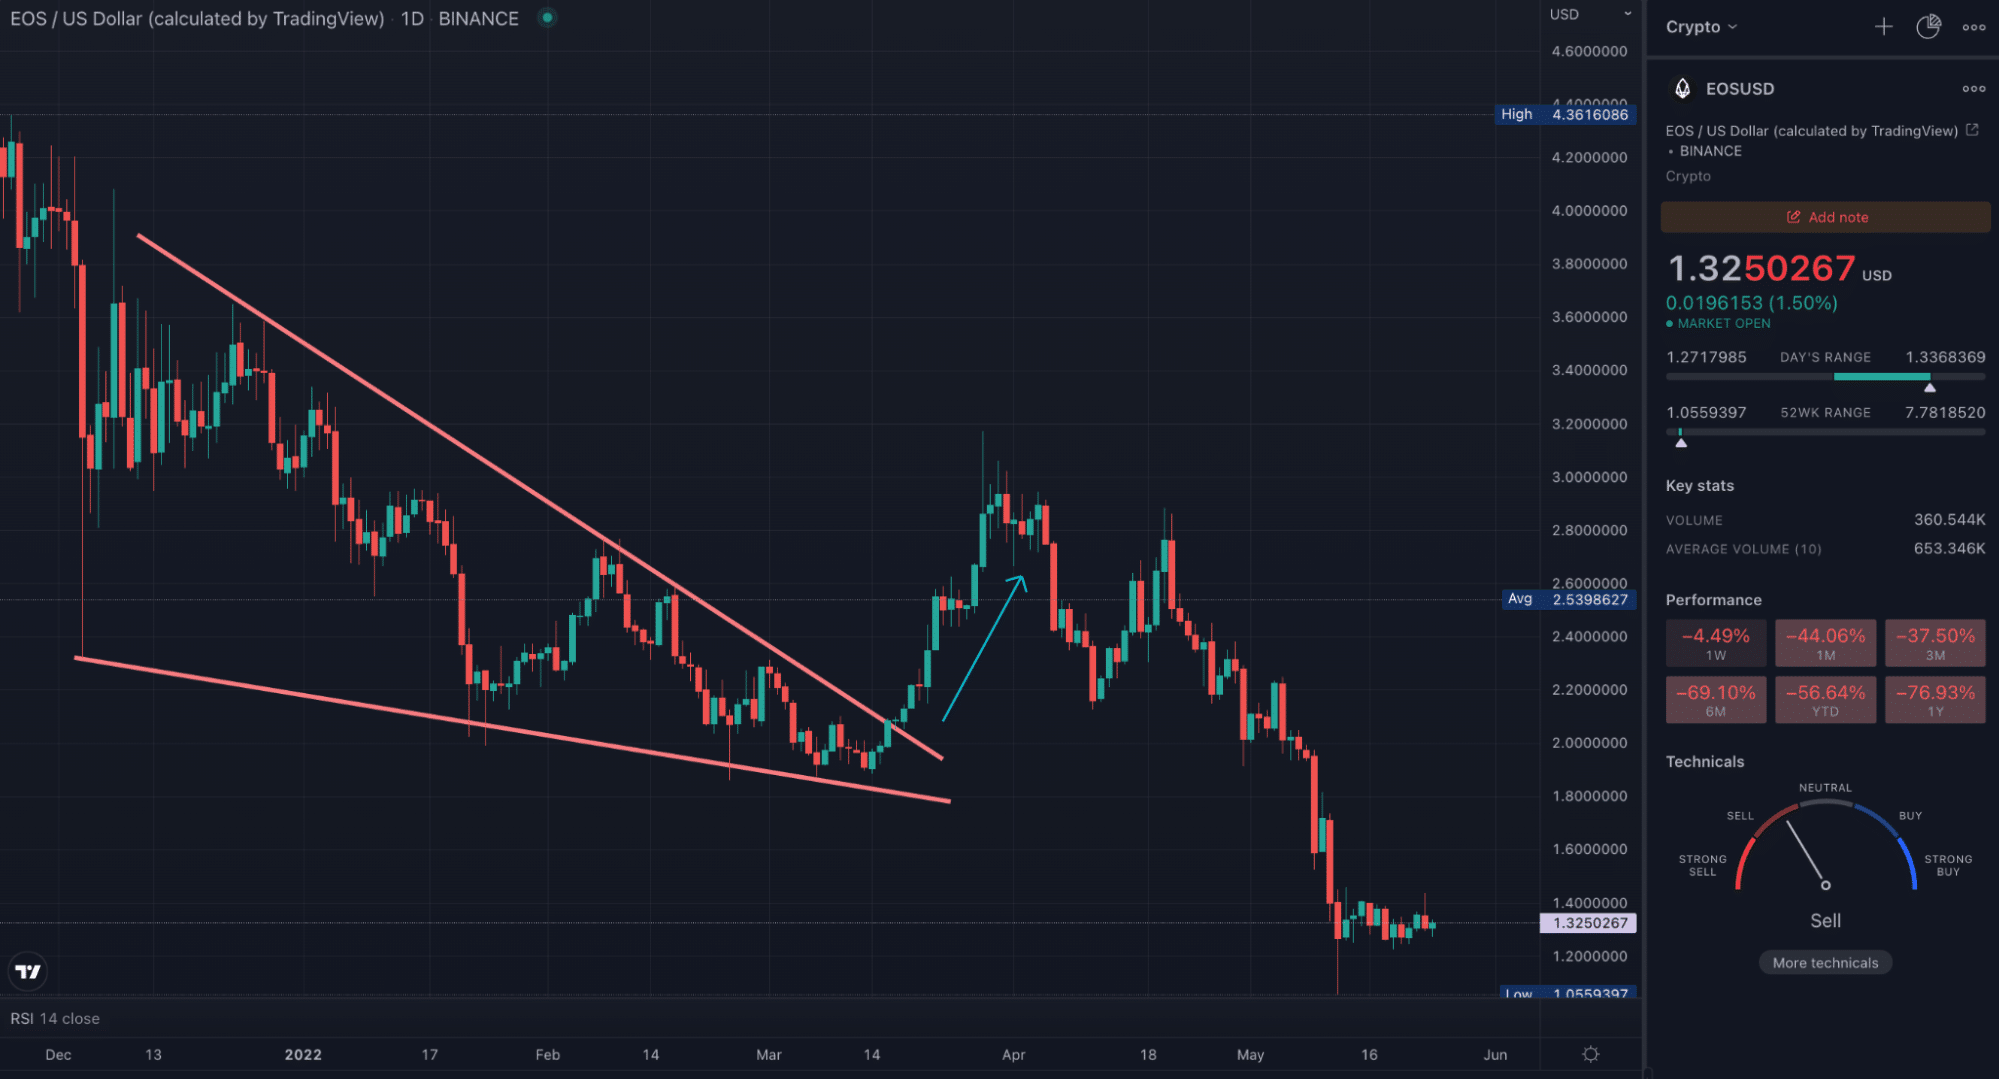 EOS TradingView daily chart showing a breakout pattern in the form of a wedge